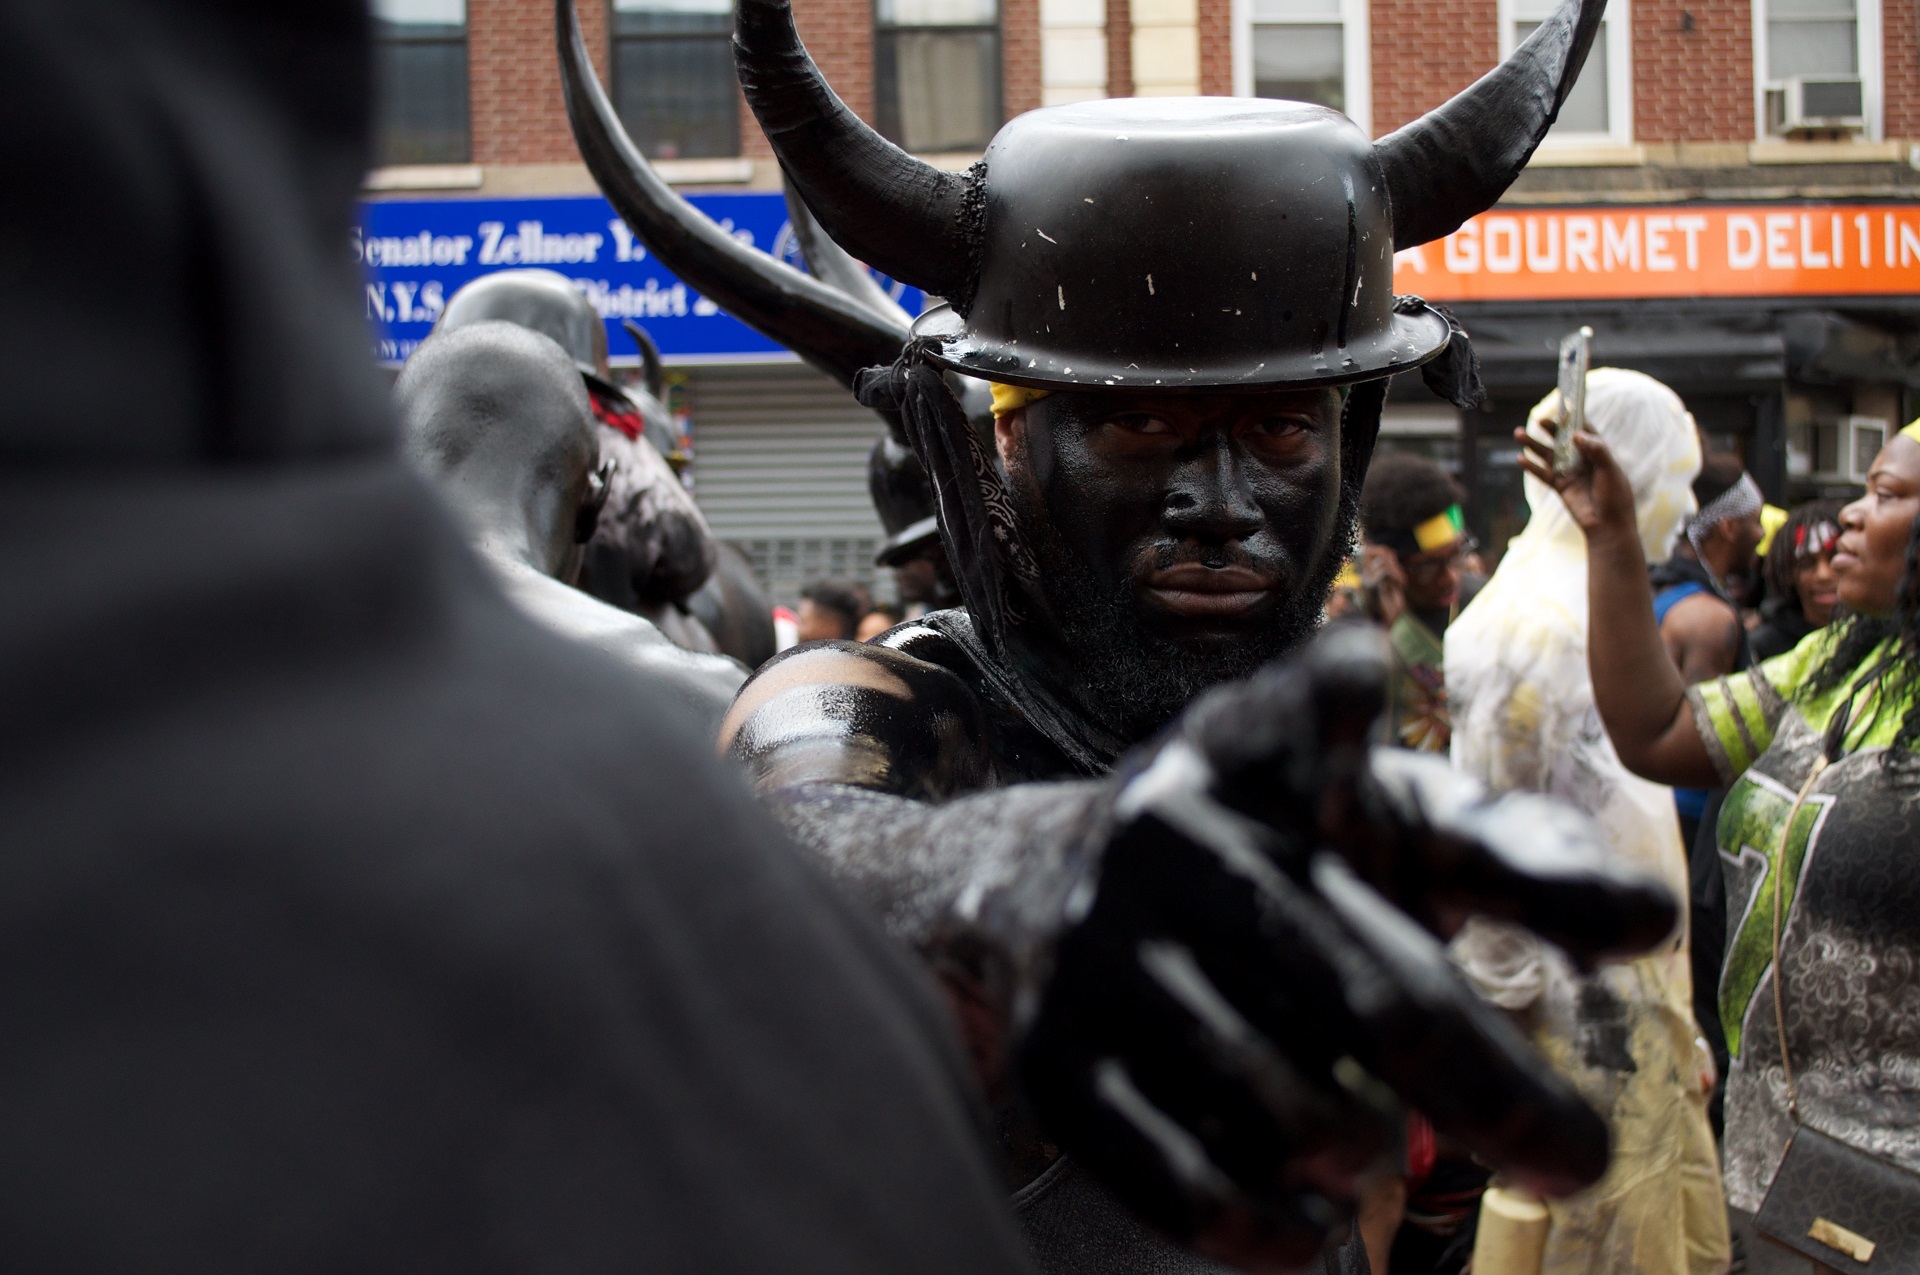 An attendee covered in oil wearing a hat with horns.